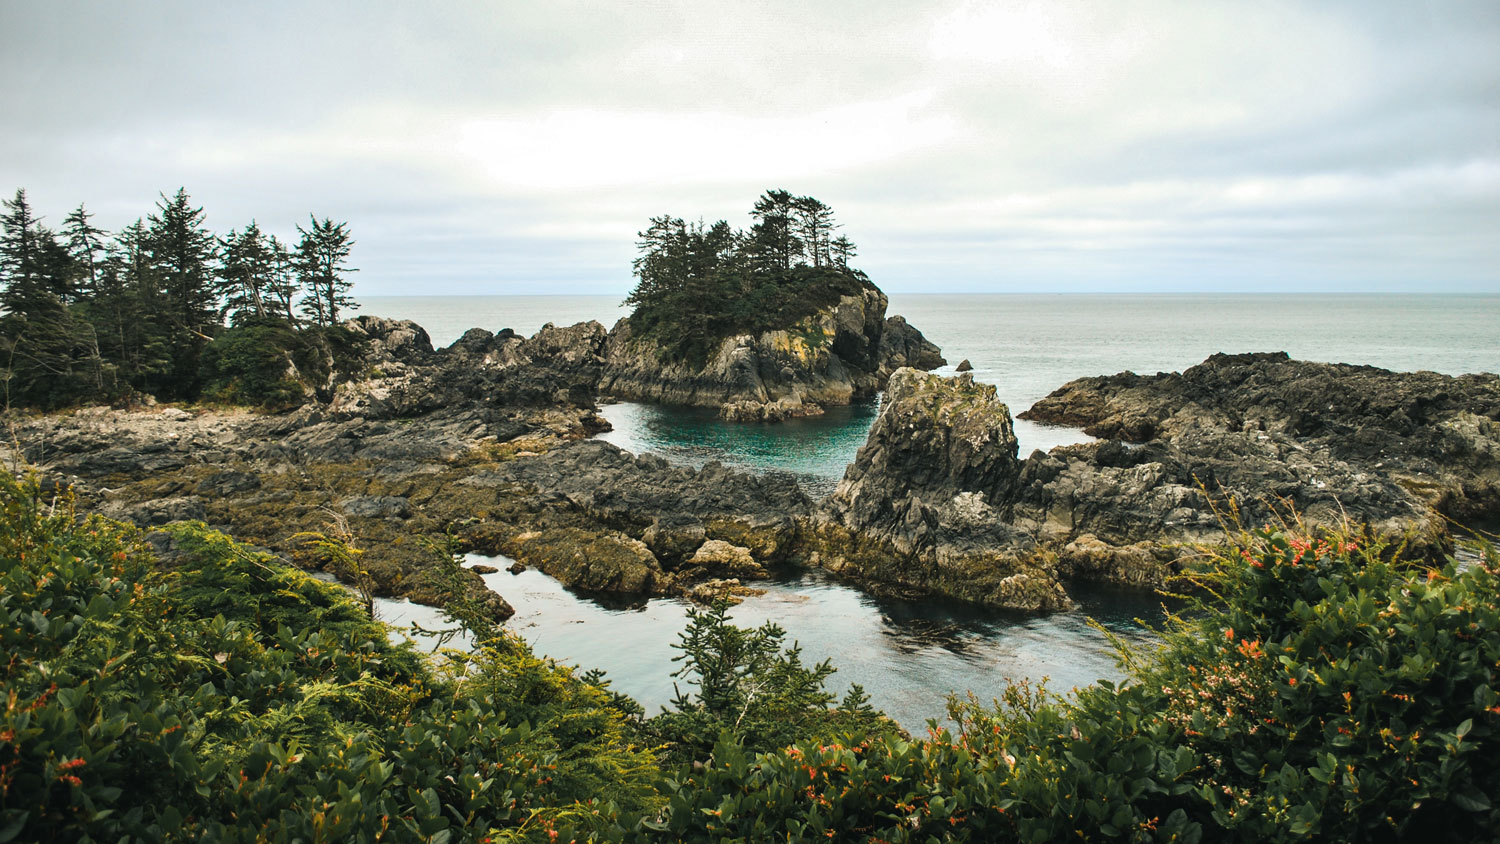 Wild Pacific Trail in Ucluelet